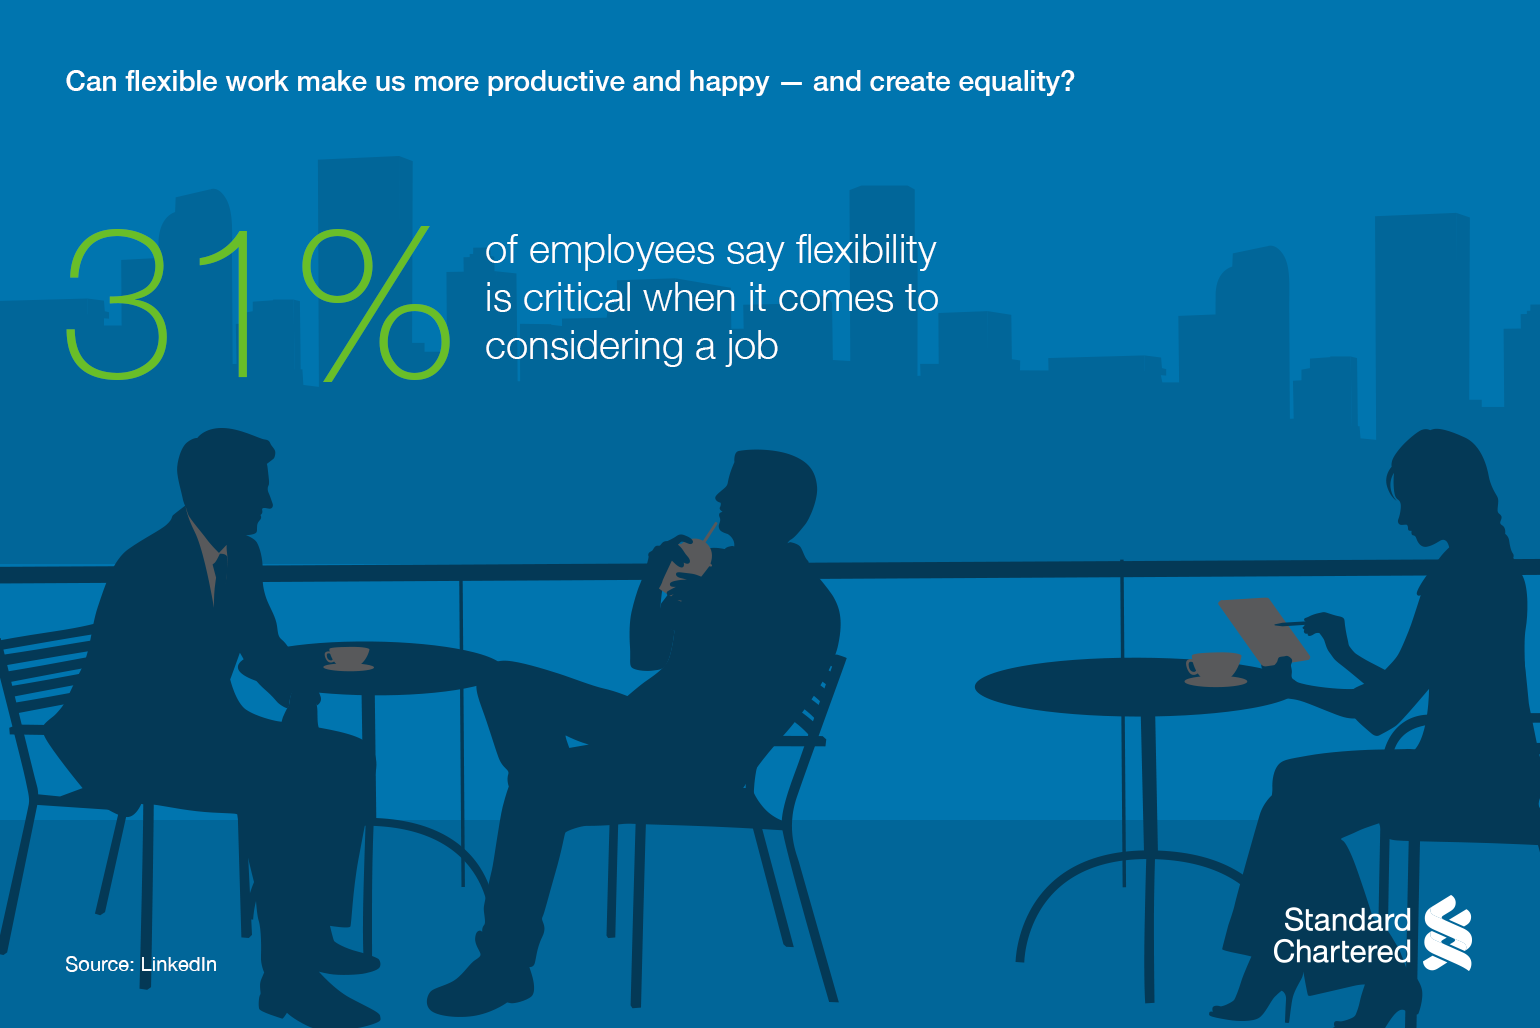 31% of employees say flexibility is critical when it comes to considering a job